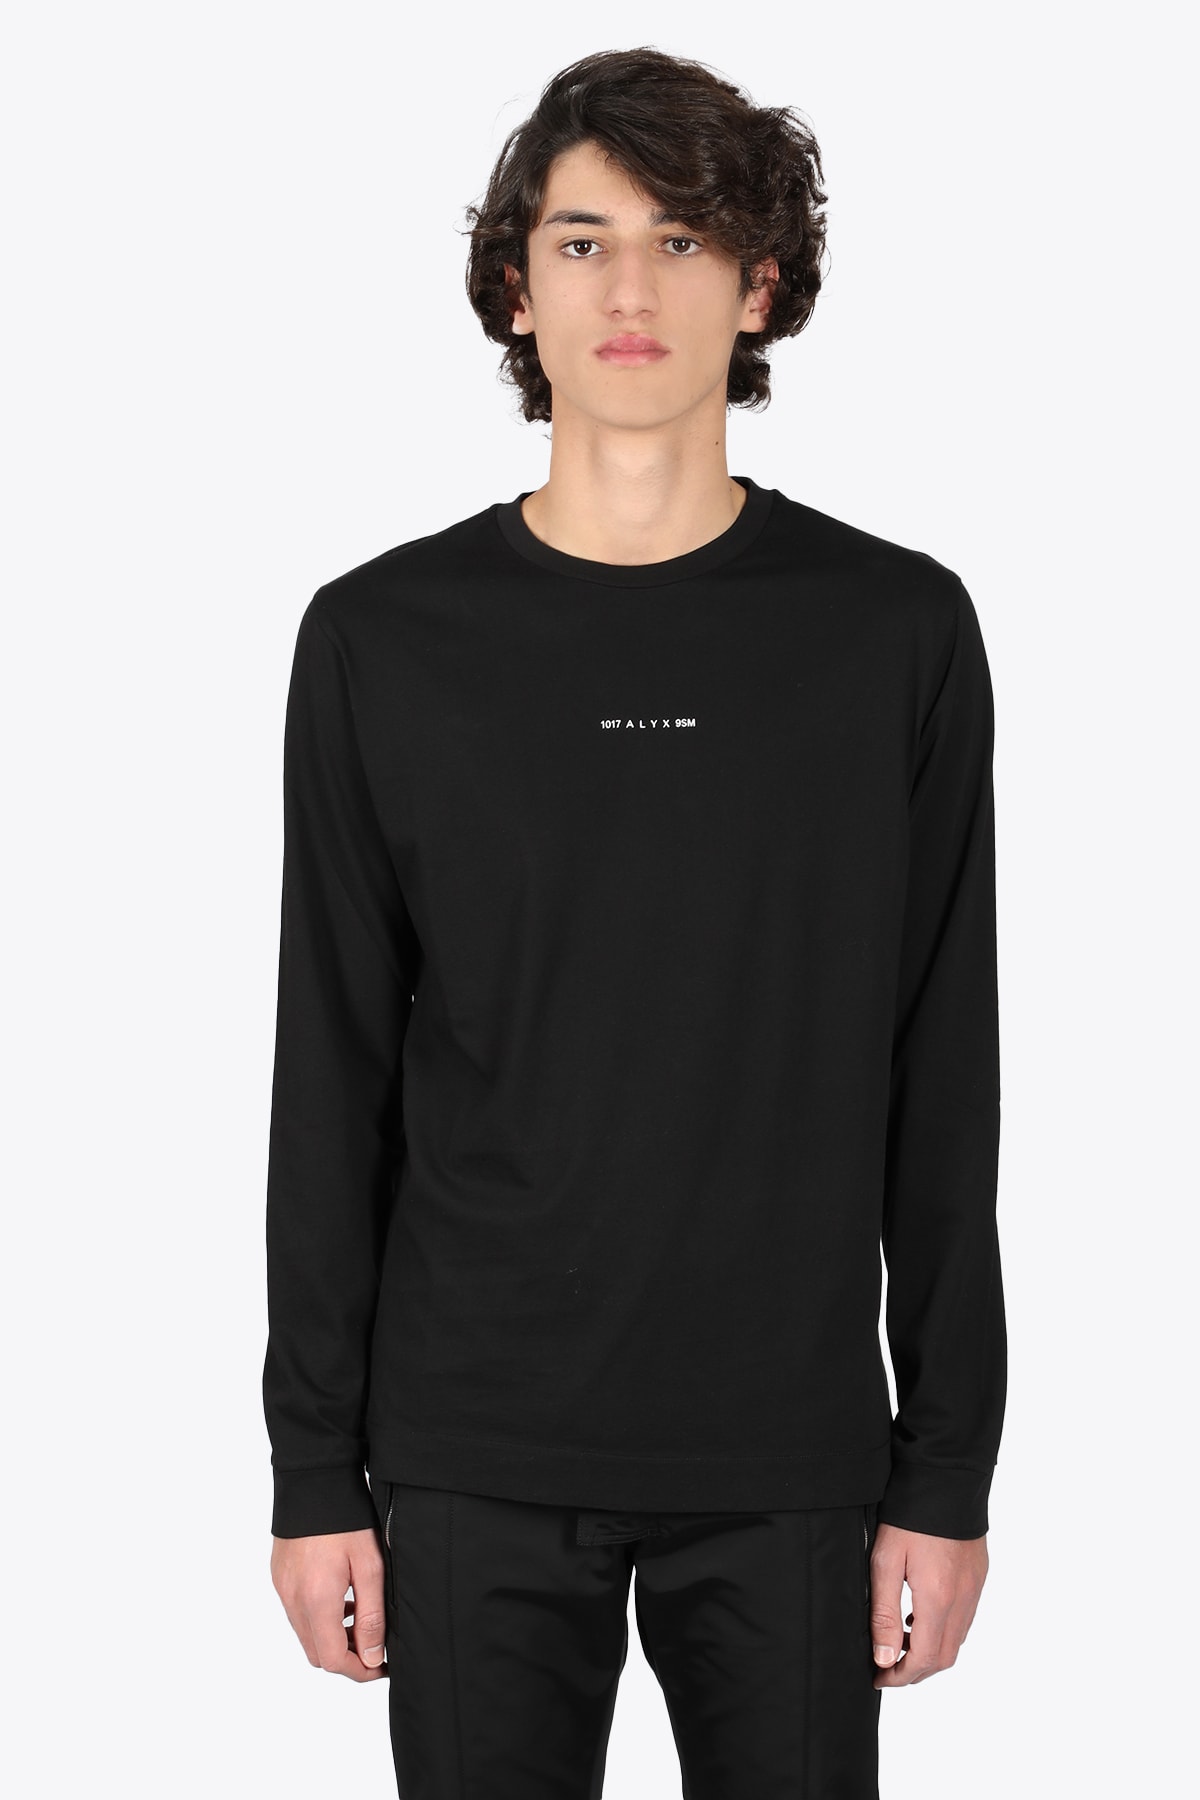 1017 ALYX 9SM Graphic L/s T-shirt Long sleeves black cotton t-shirt with logo